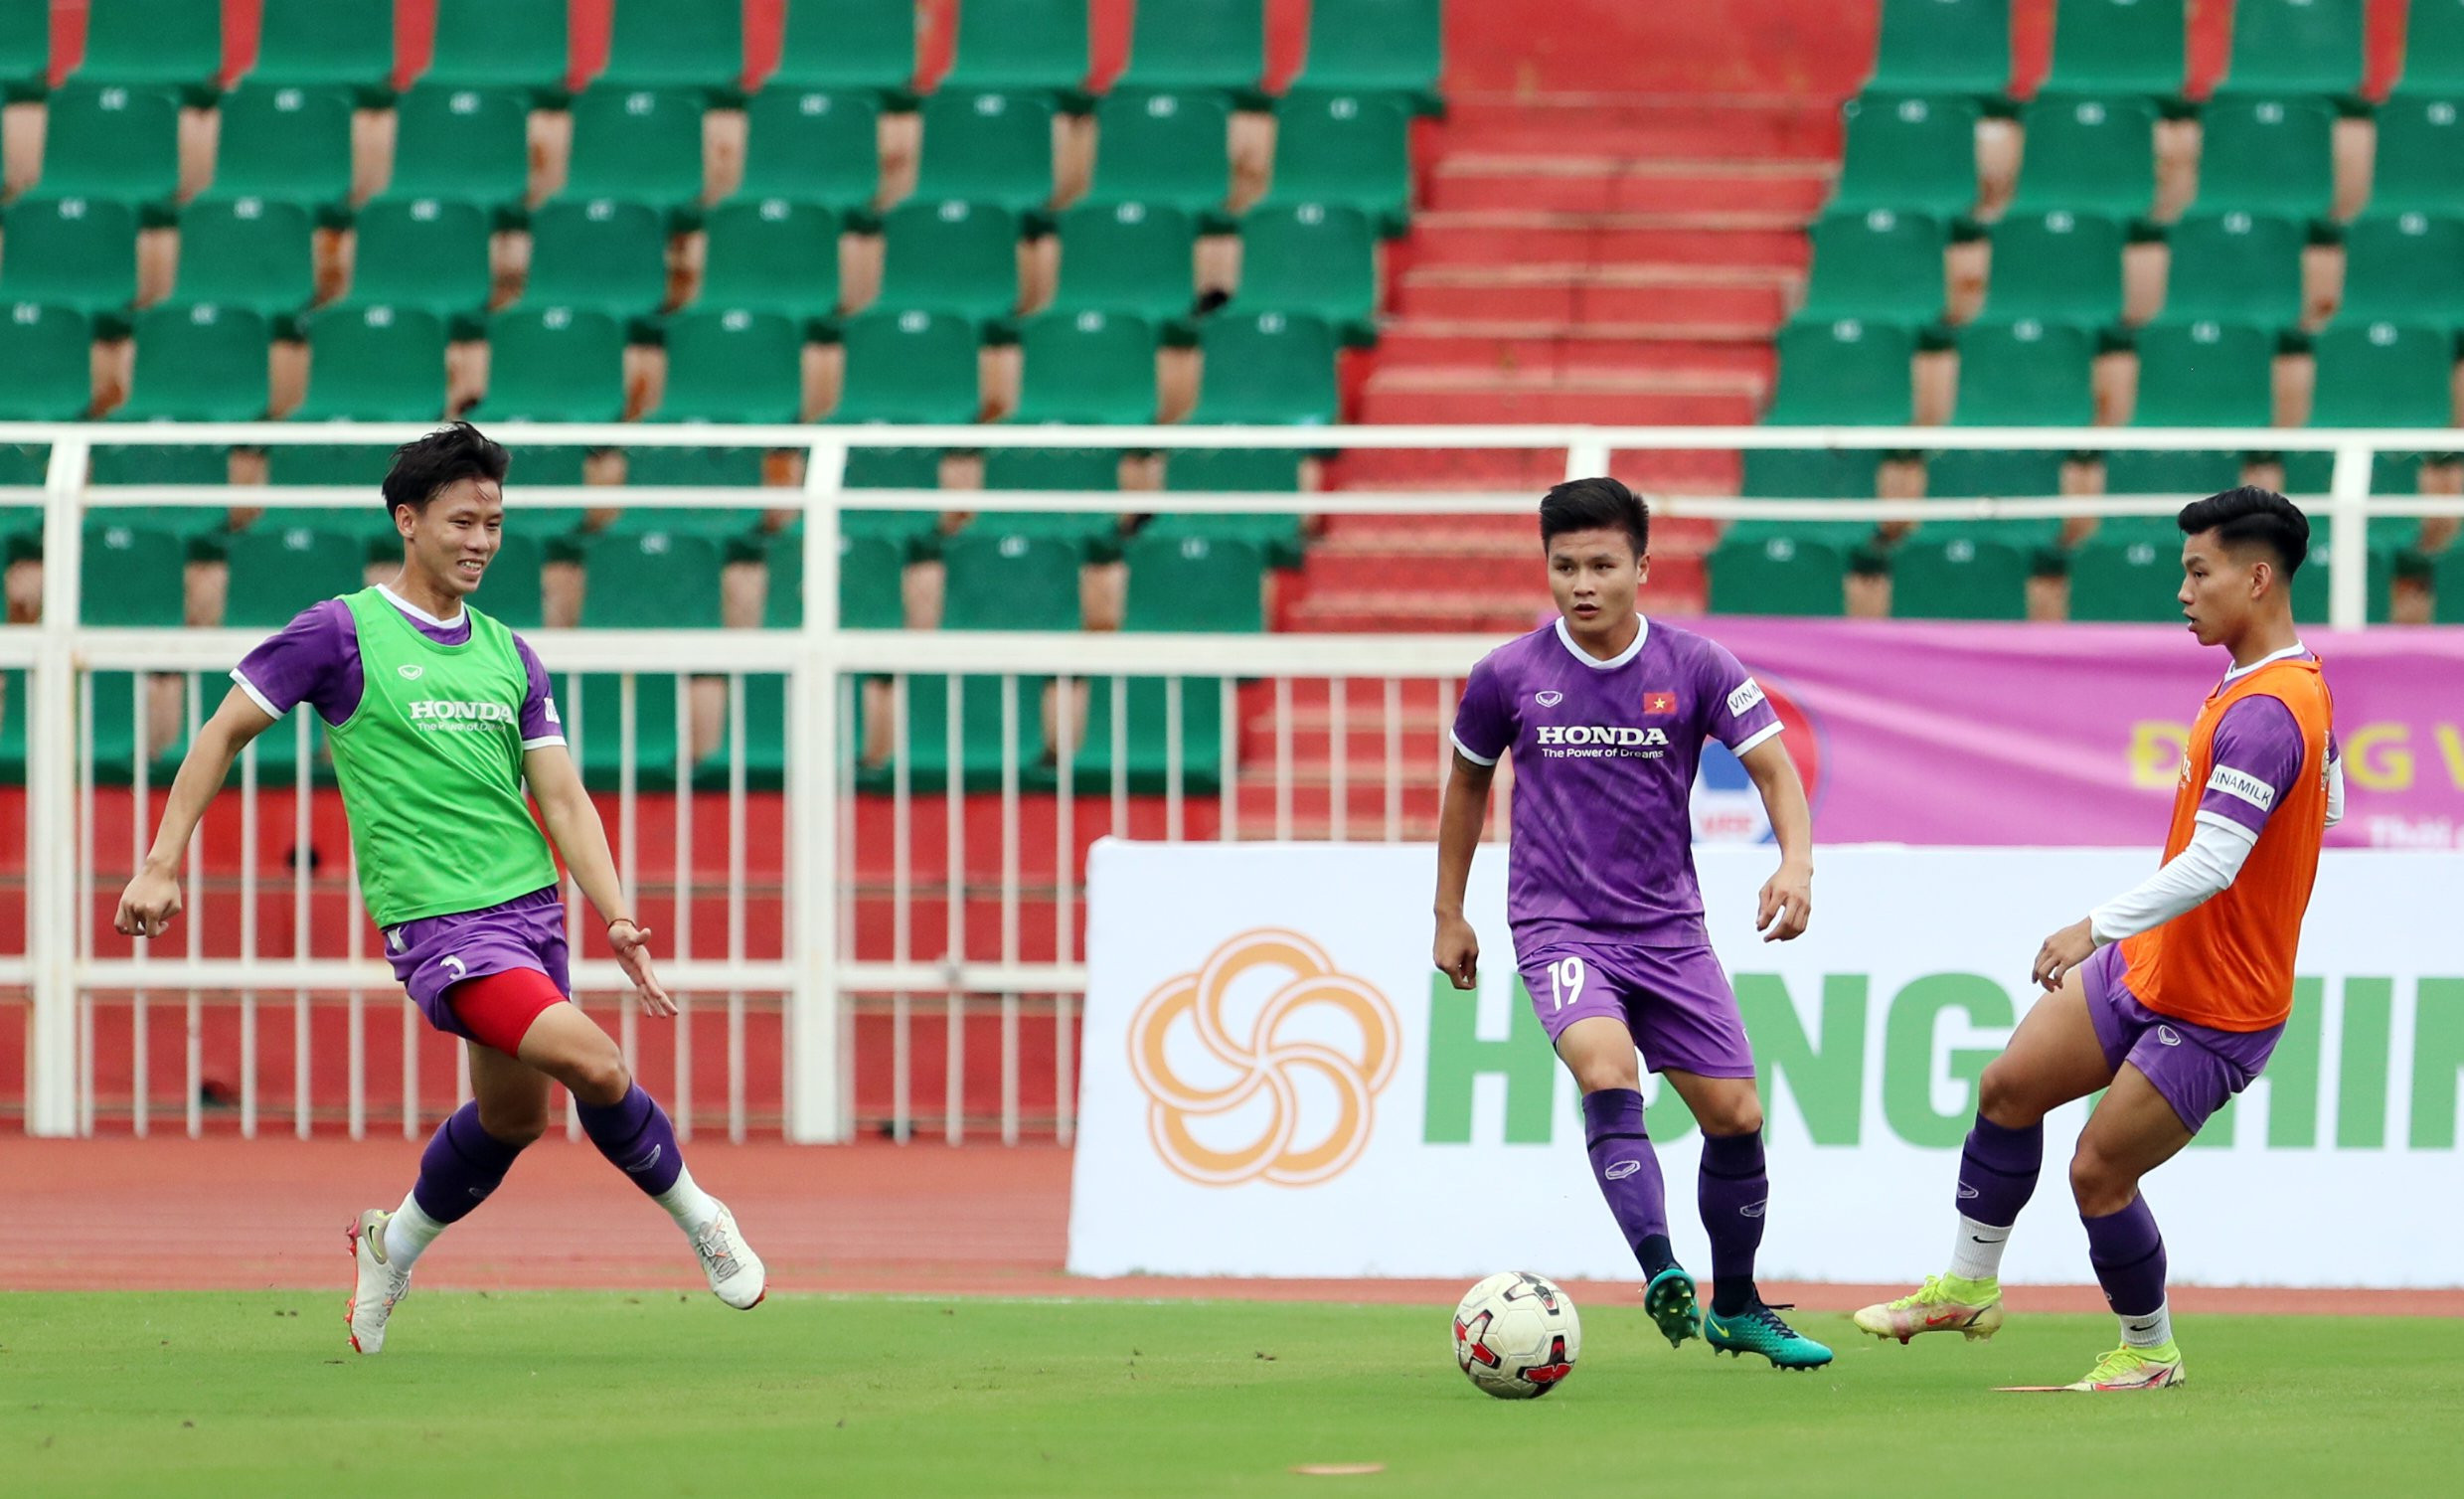 The Vietnamese team was quite excited during the first training session at Thong Nhat Stadium on the afternoon of May 29, preparing for a friendly match with Afghanistan.